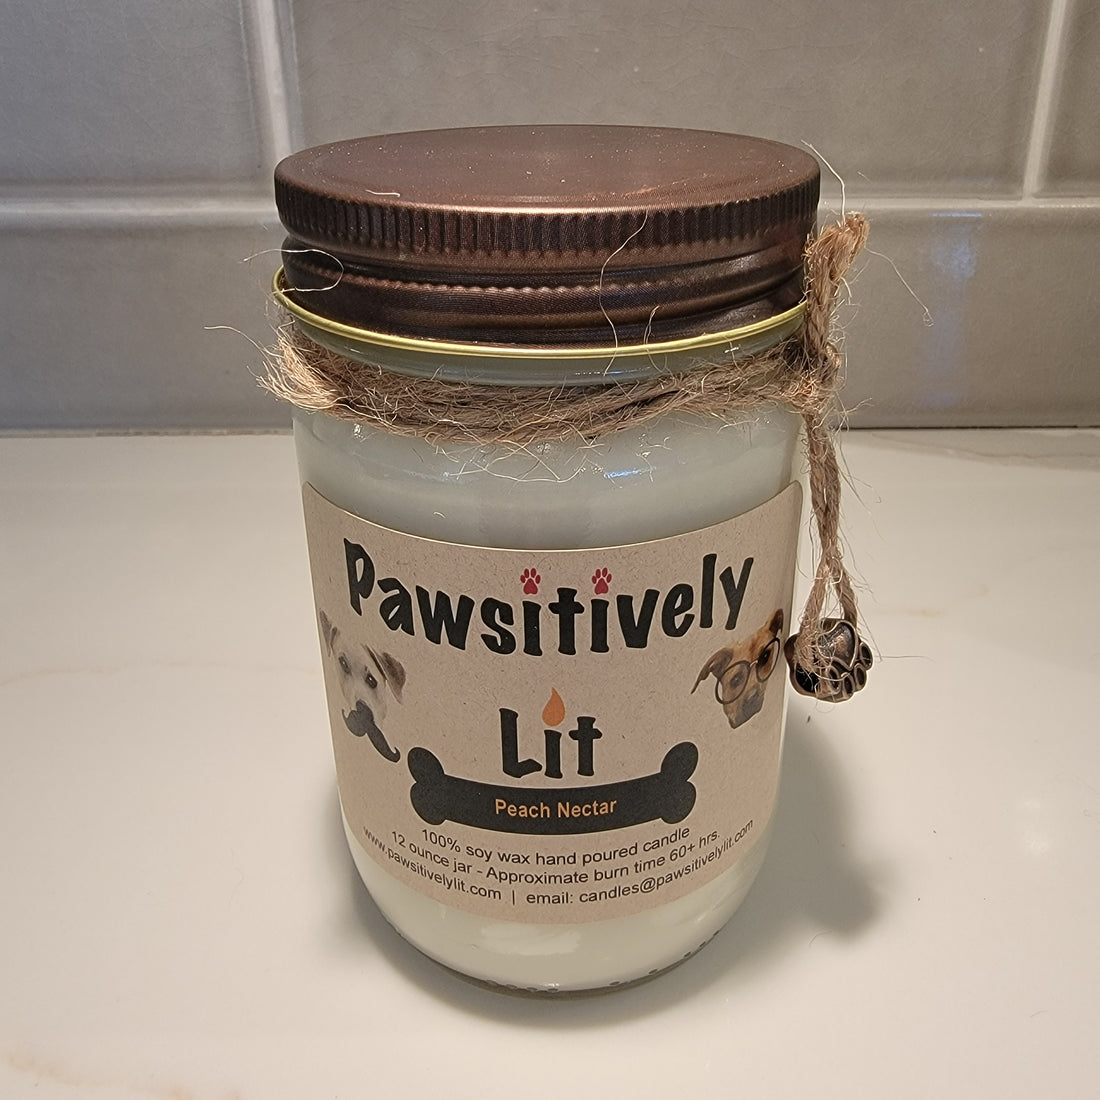 Peach Nectar Scented Pawsitively Lit 100% Soy Wax Mason Jar Candle